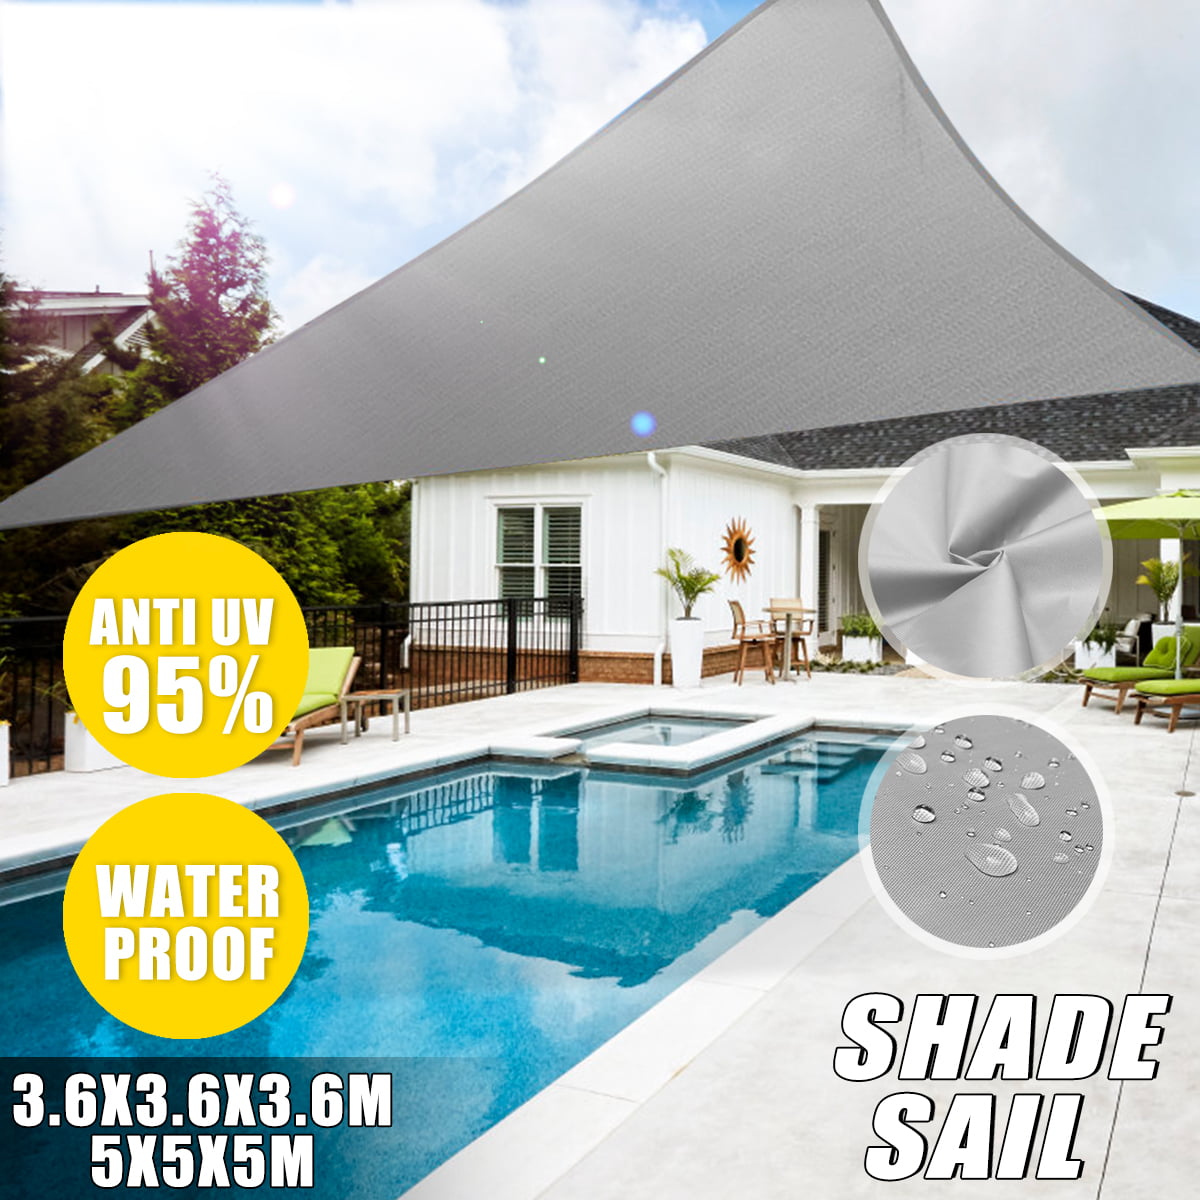 Details about   Sun Shade Sail Garden Patio Awning Canopy Sunscreen 98% UV Block dust Proof New 